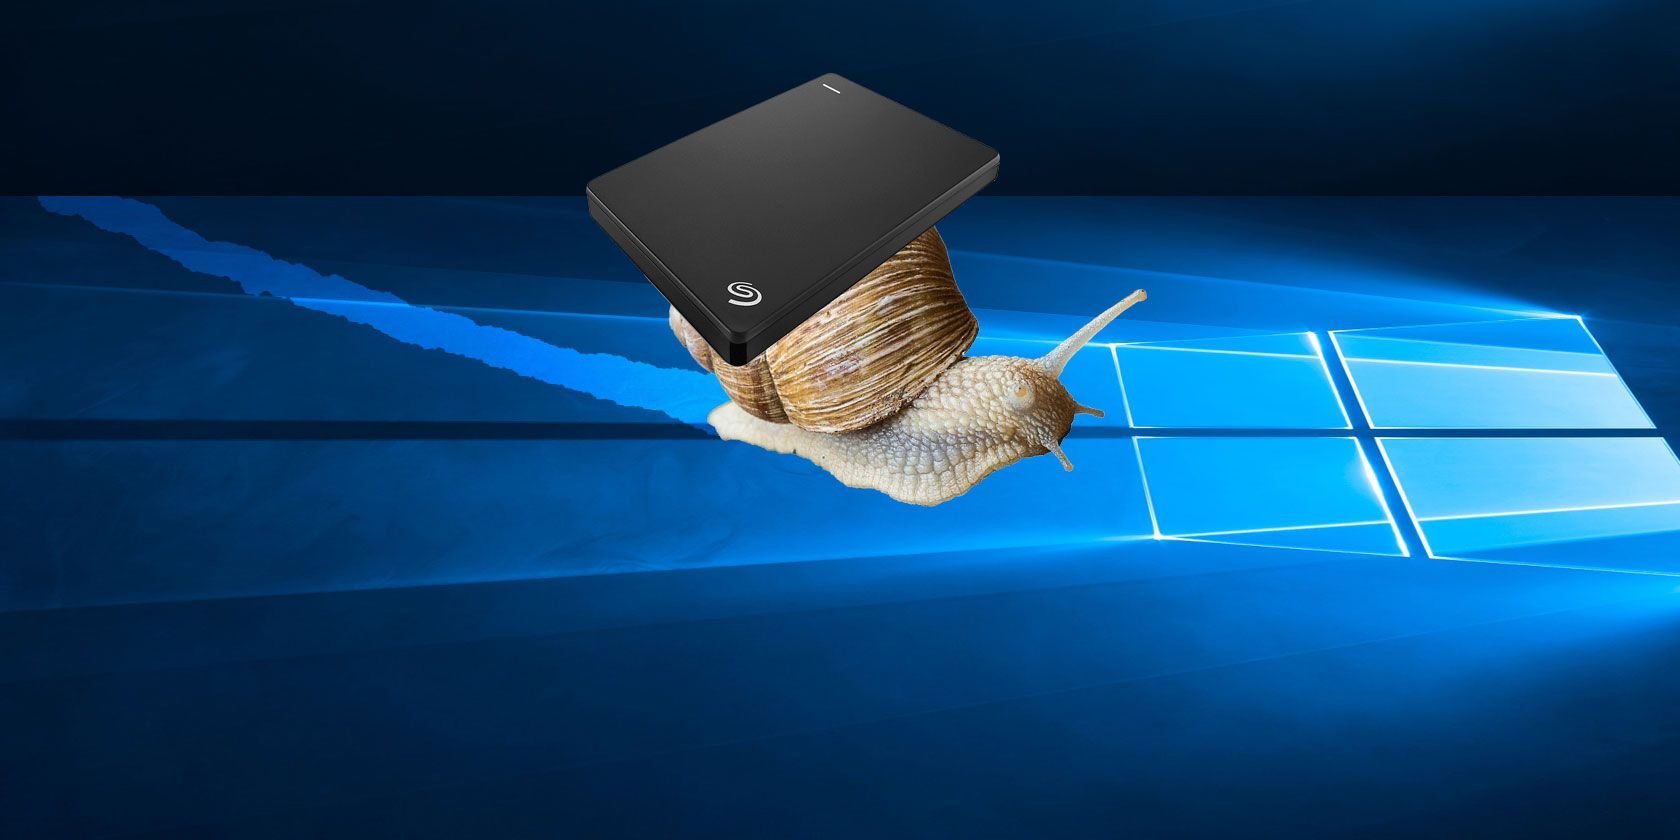 How to Fix a Slow External Hard Drive in Windows 10